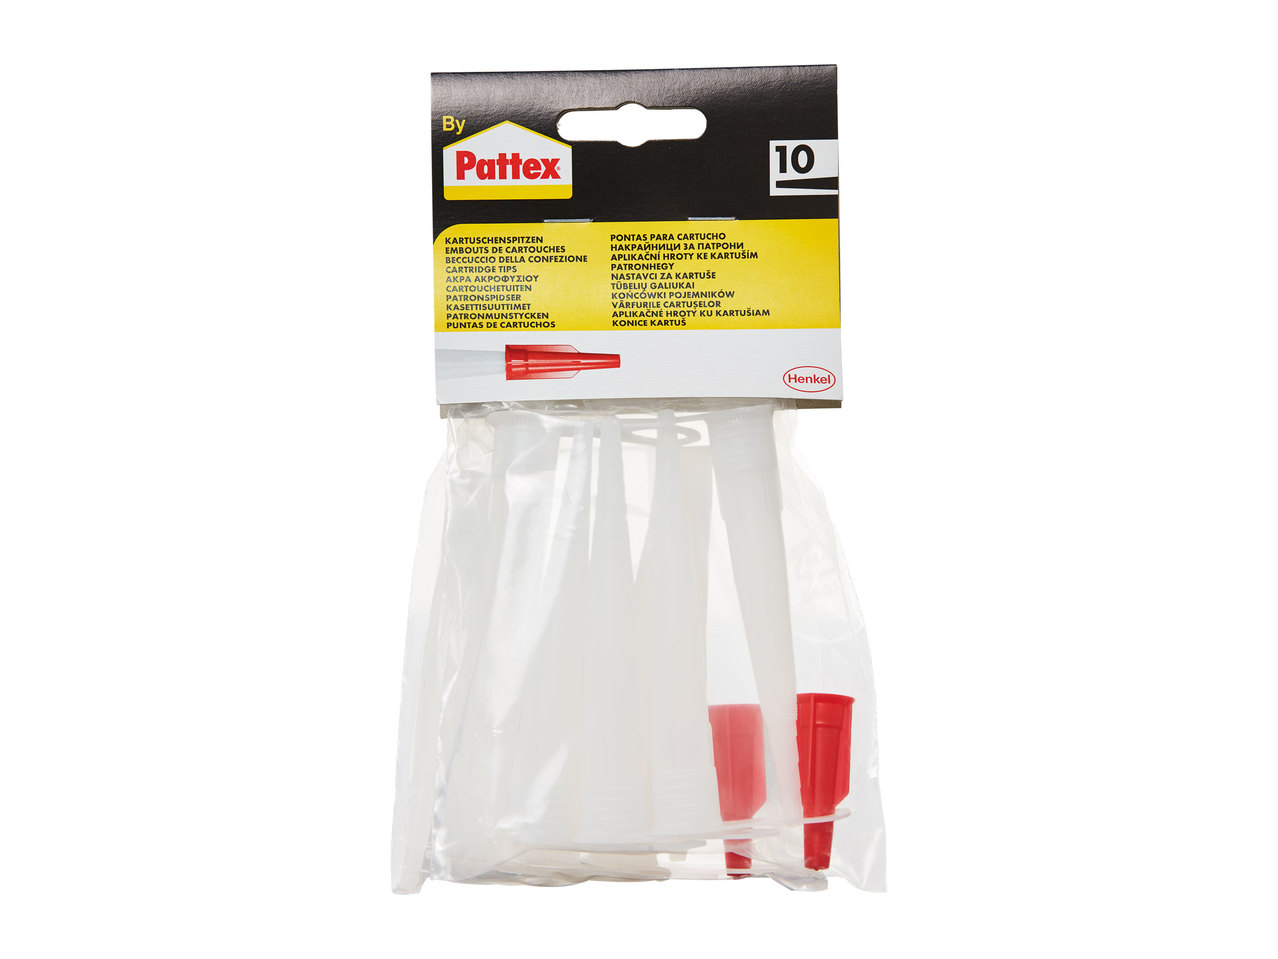 Pattex Silicone Cutter, Smooth Cutter or 10 Cartridge Nozzles1